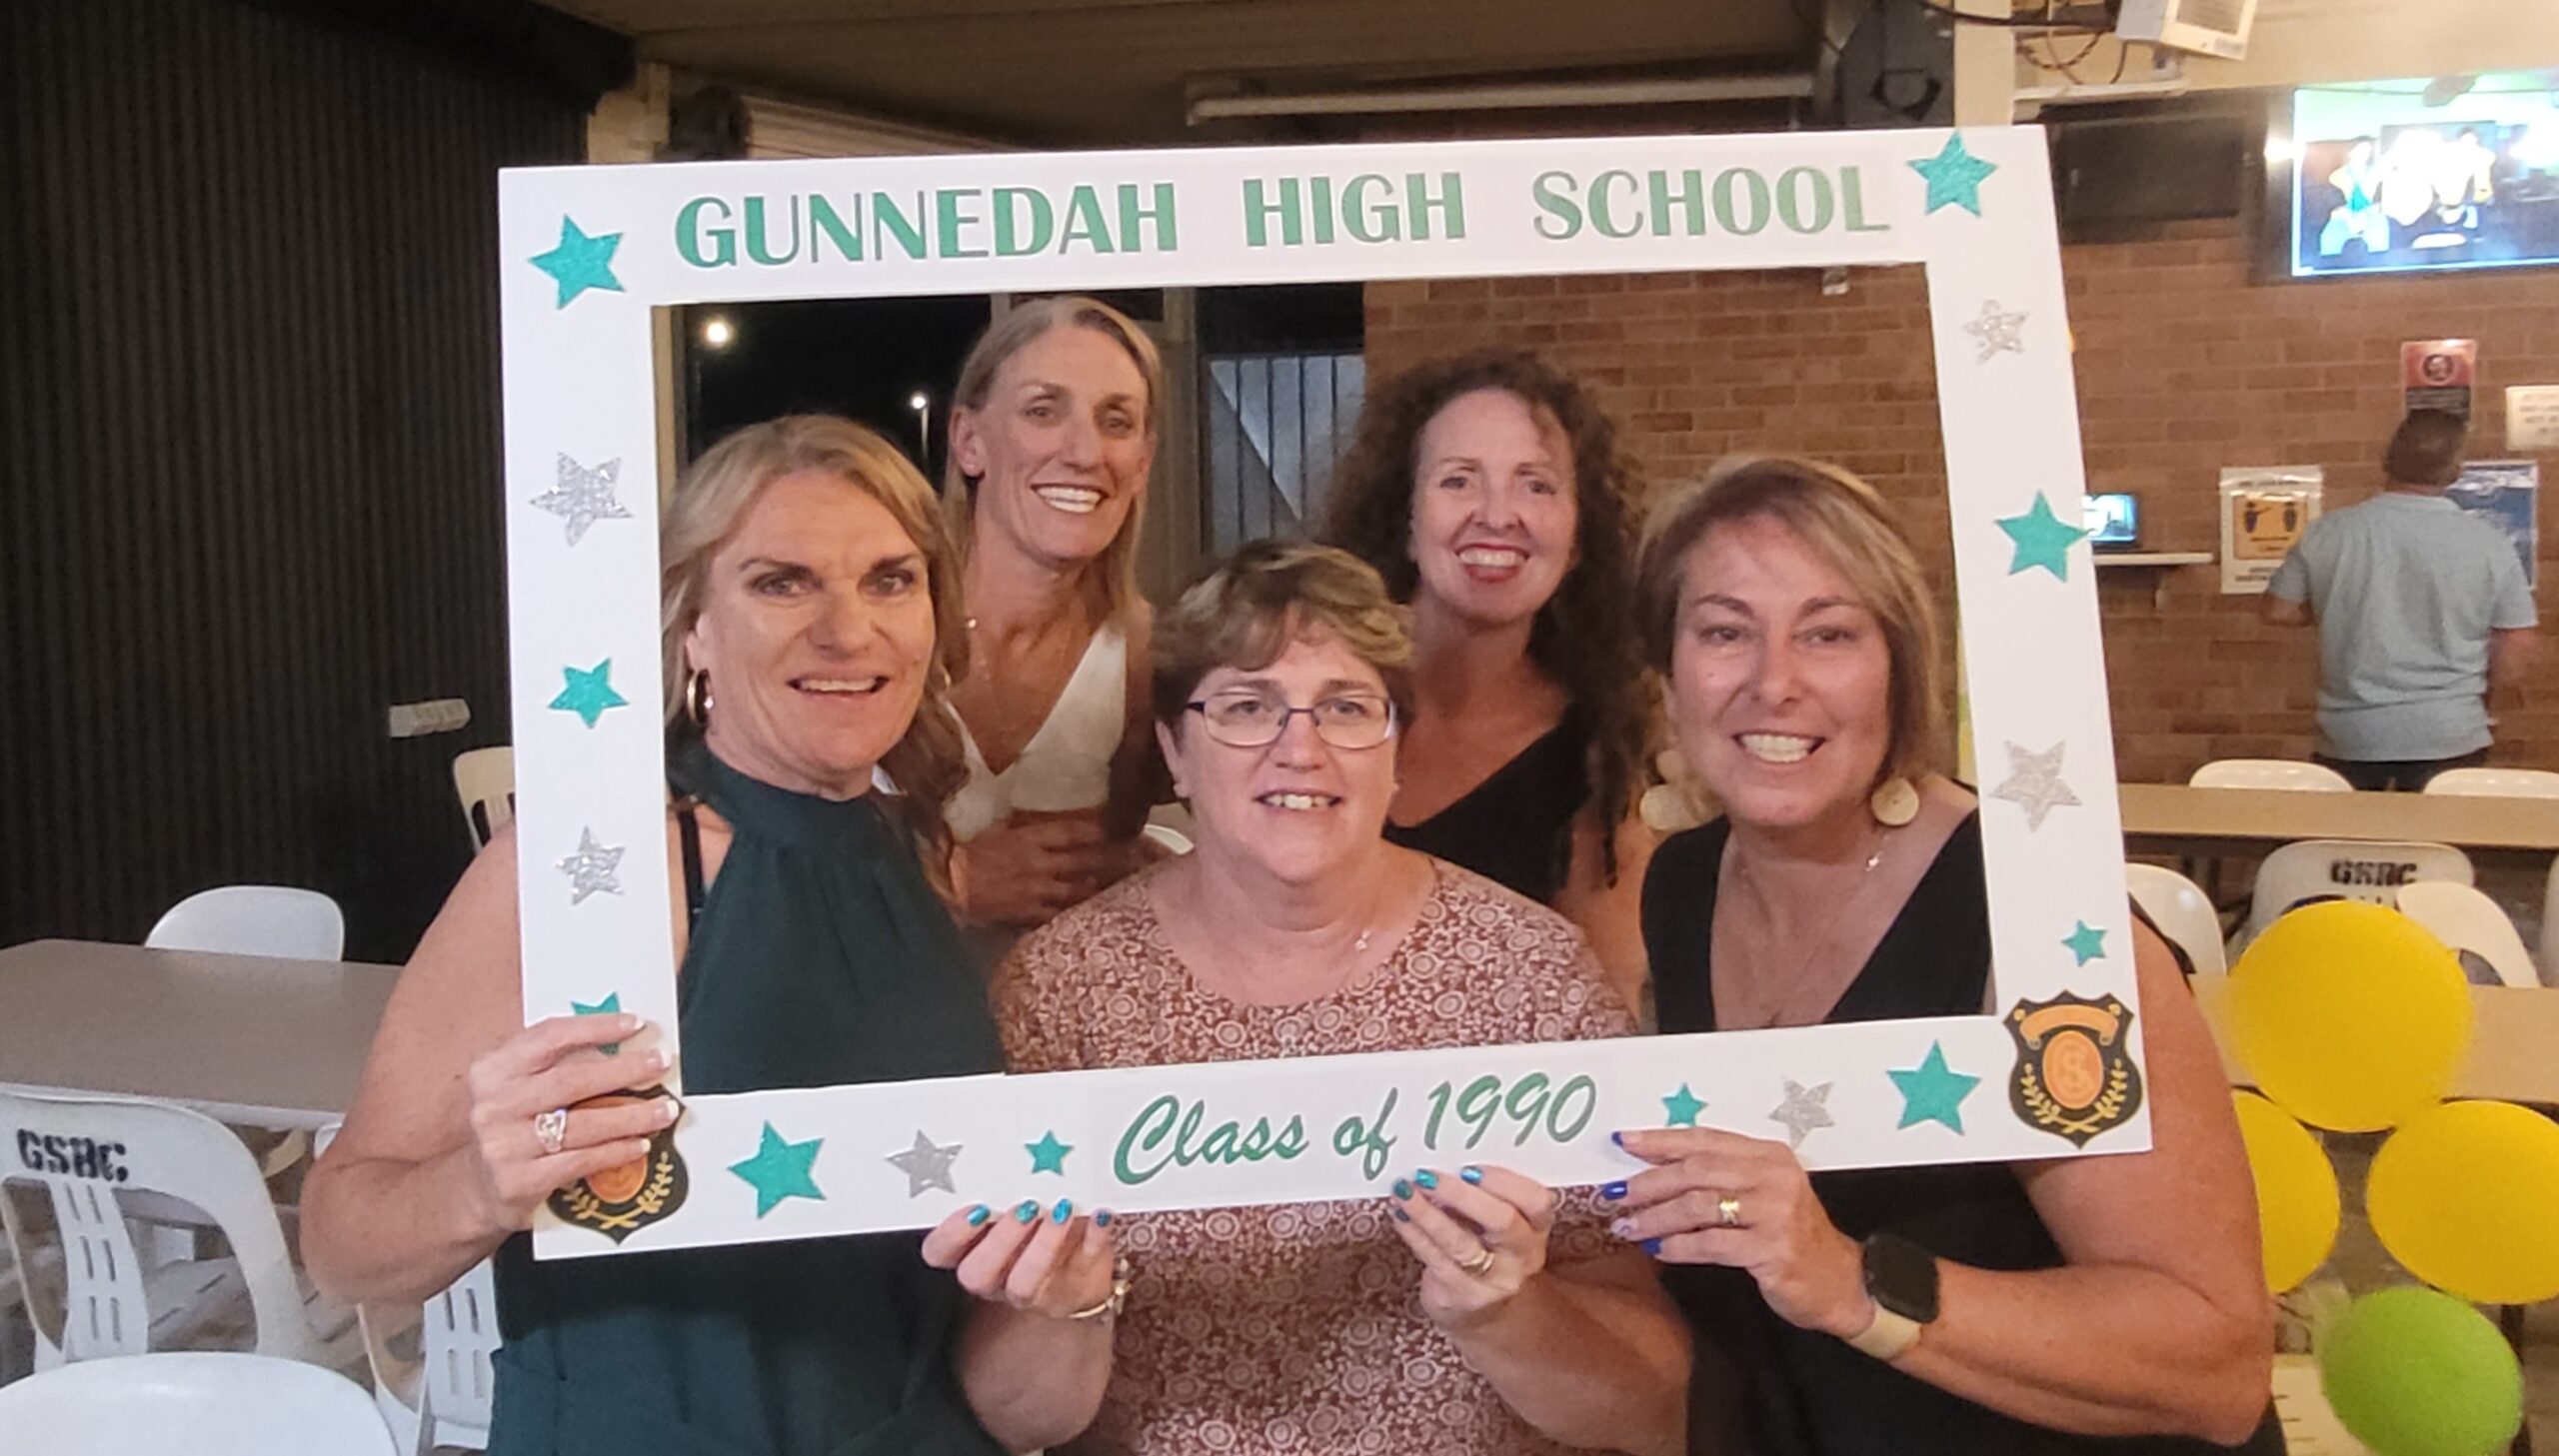 High school reunion more than 30 years in making